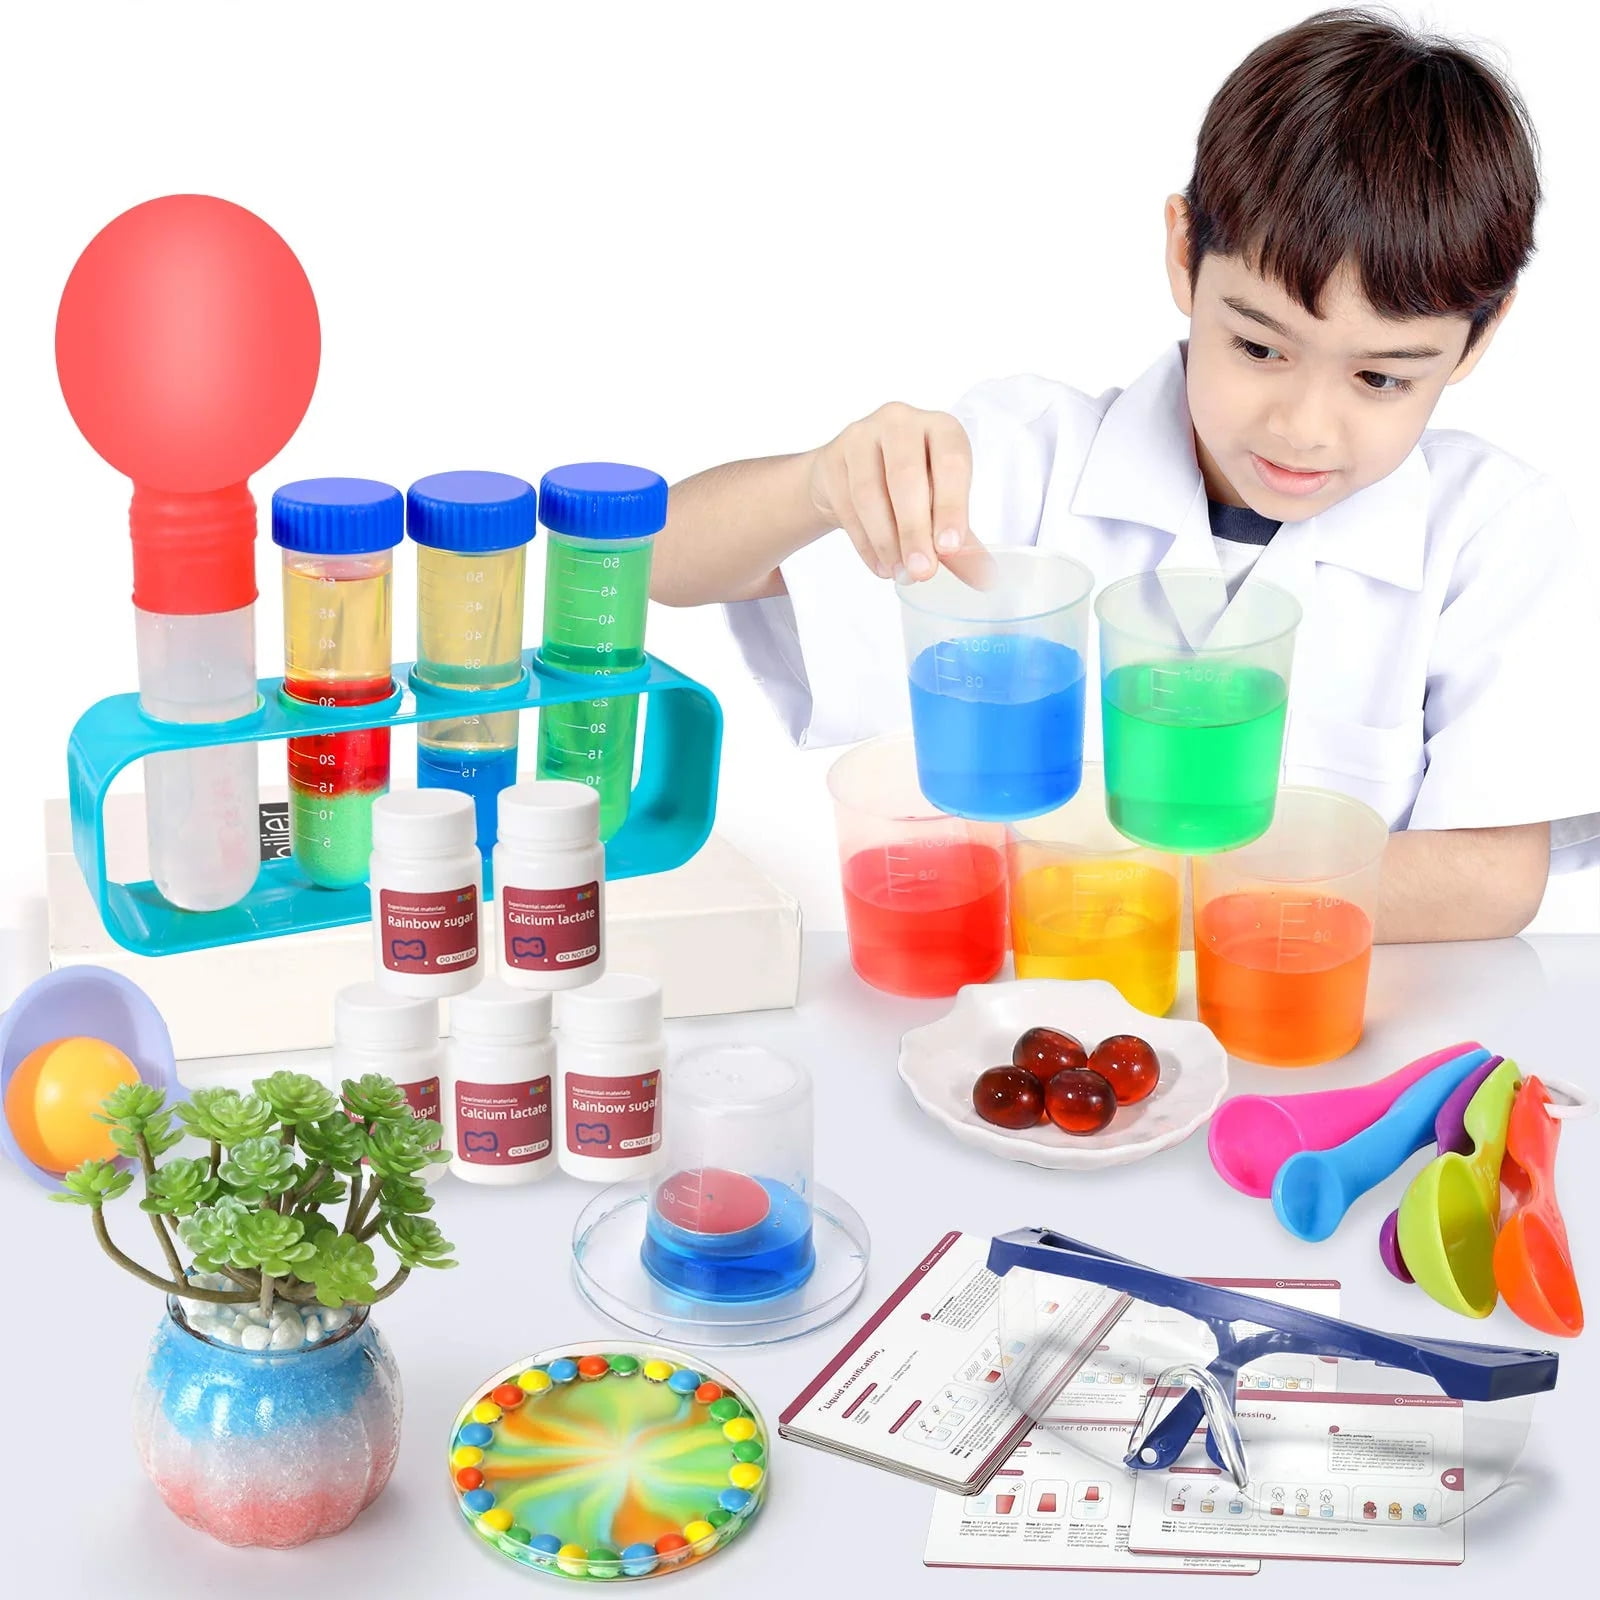  Science Kit for Kids,100 Science Lab Experiments